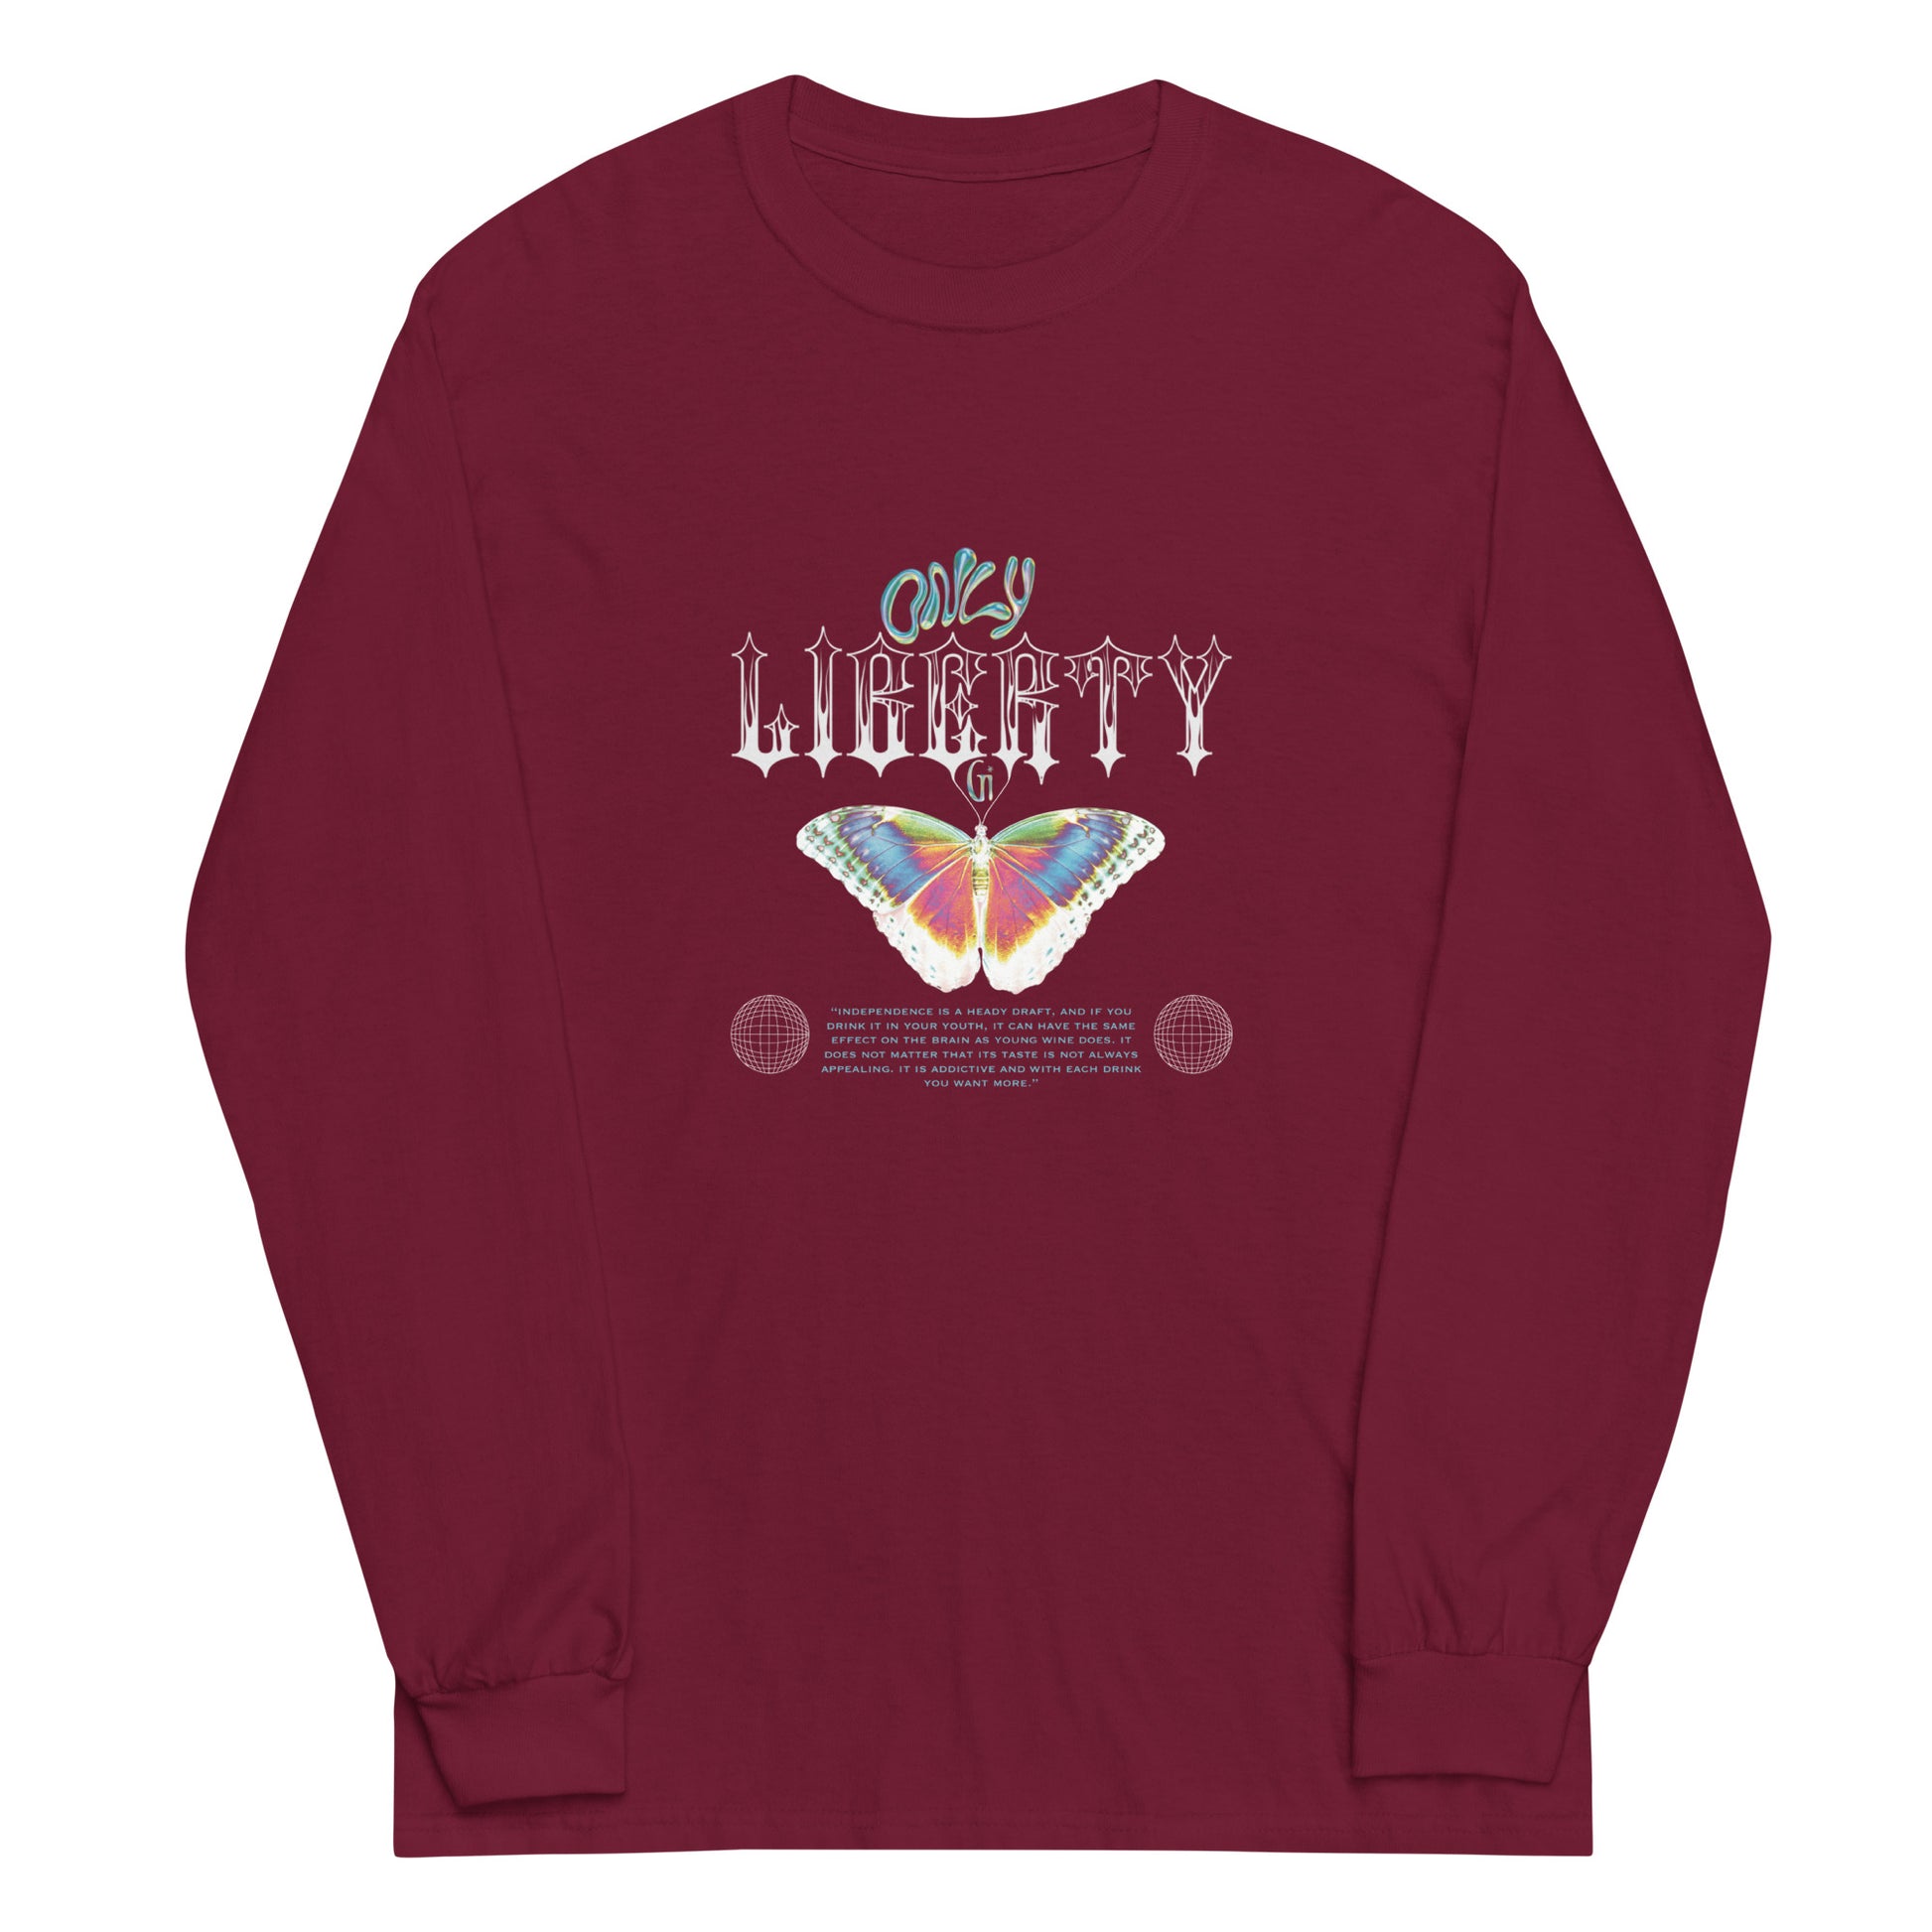 maroon unisex long sleeve with butterfly print